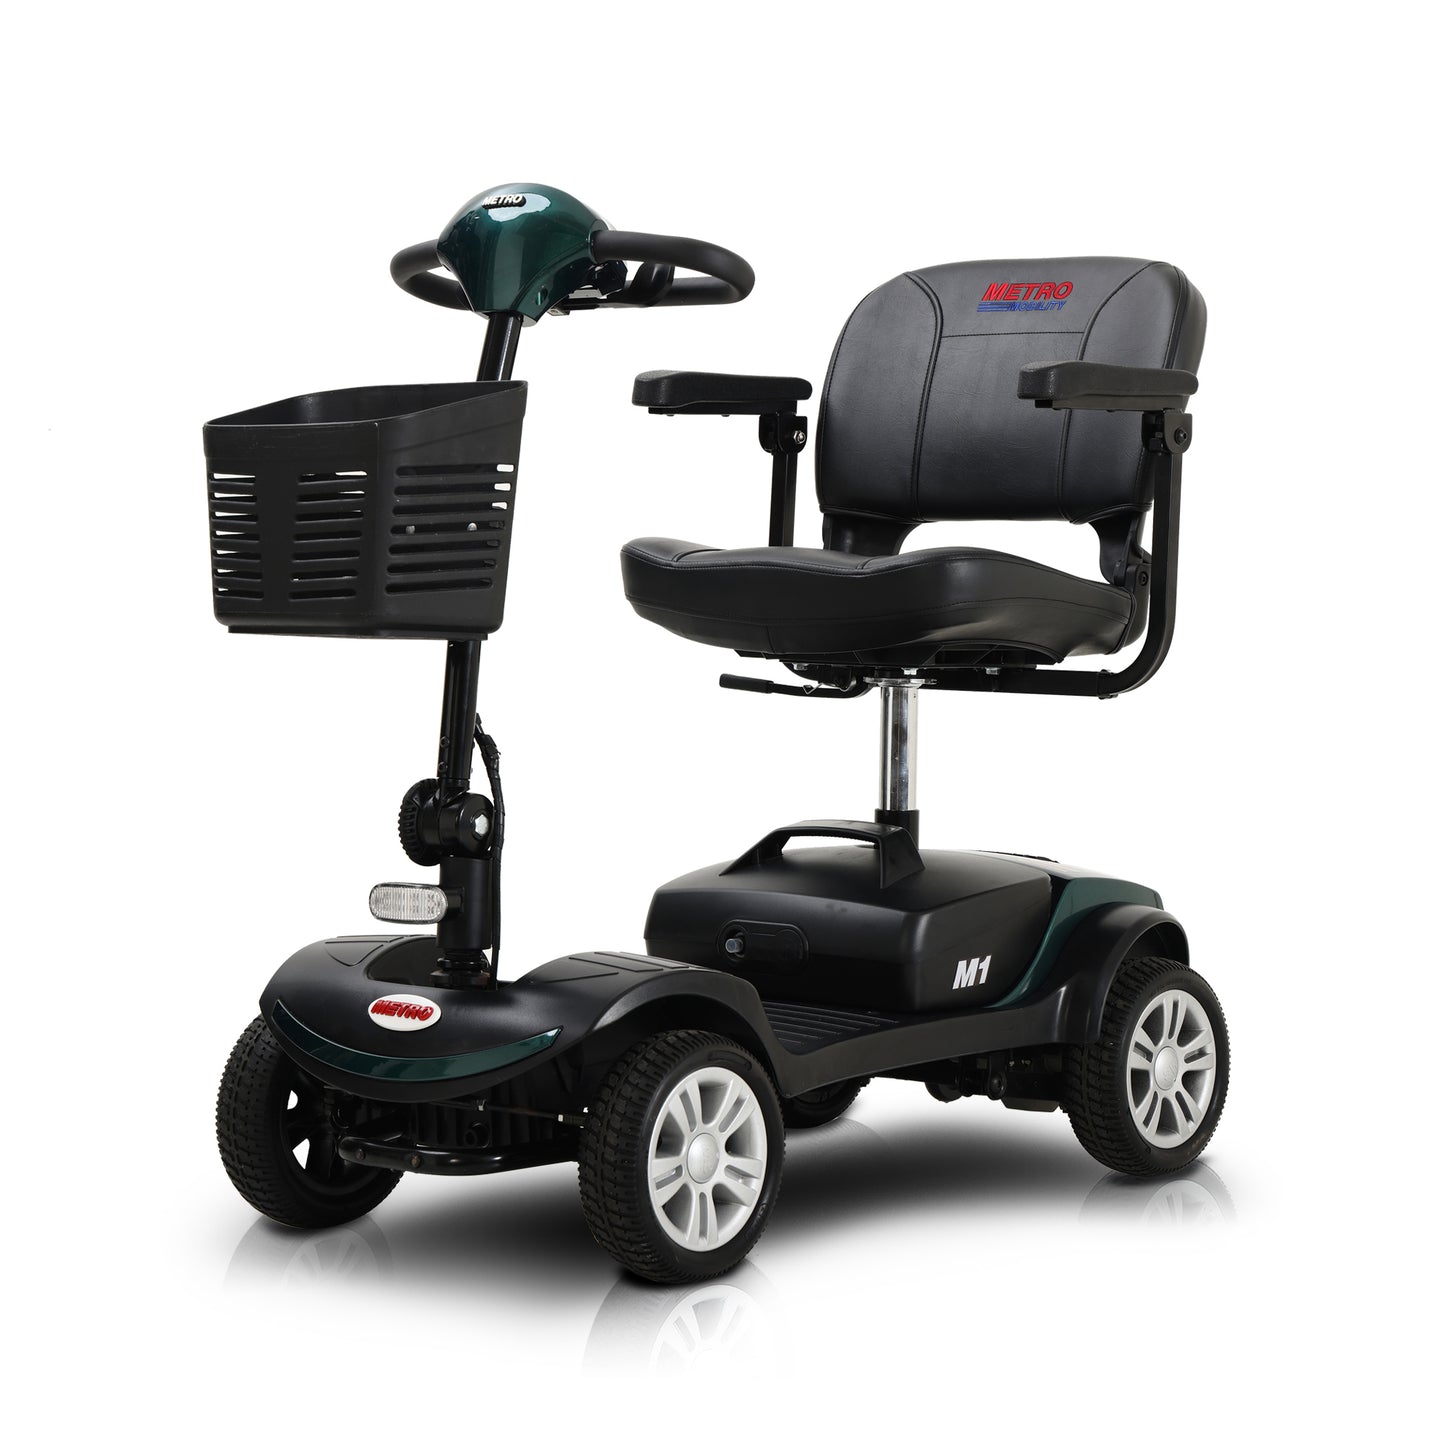 Four wheels Compact Travel Mobility Scooter with 300W Motor for Adult-300lbs, EMERALD